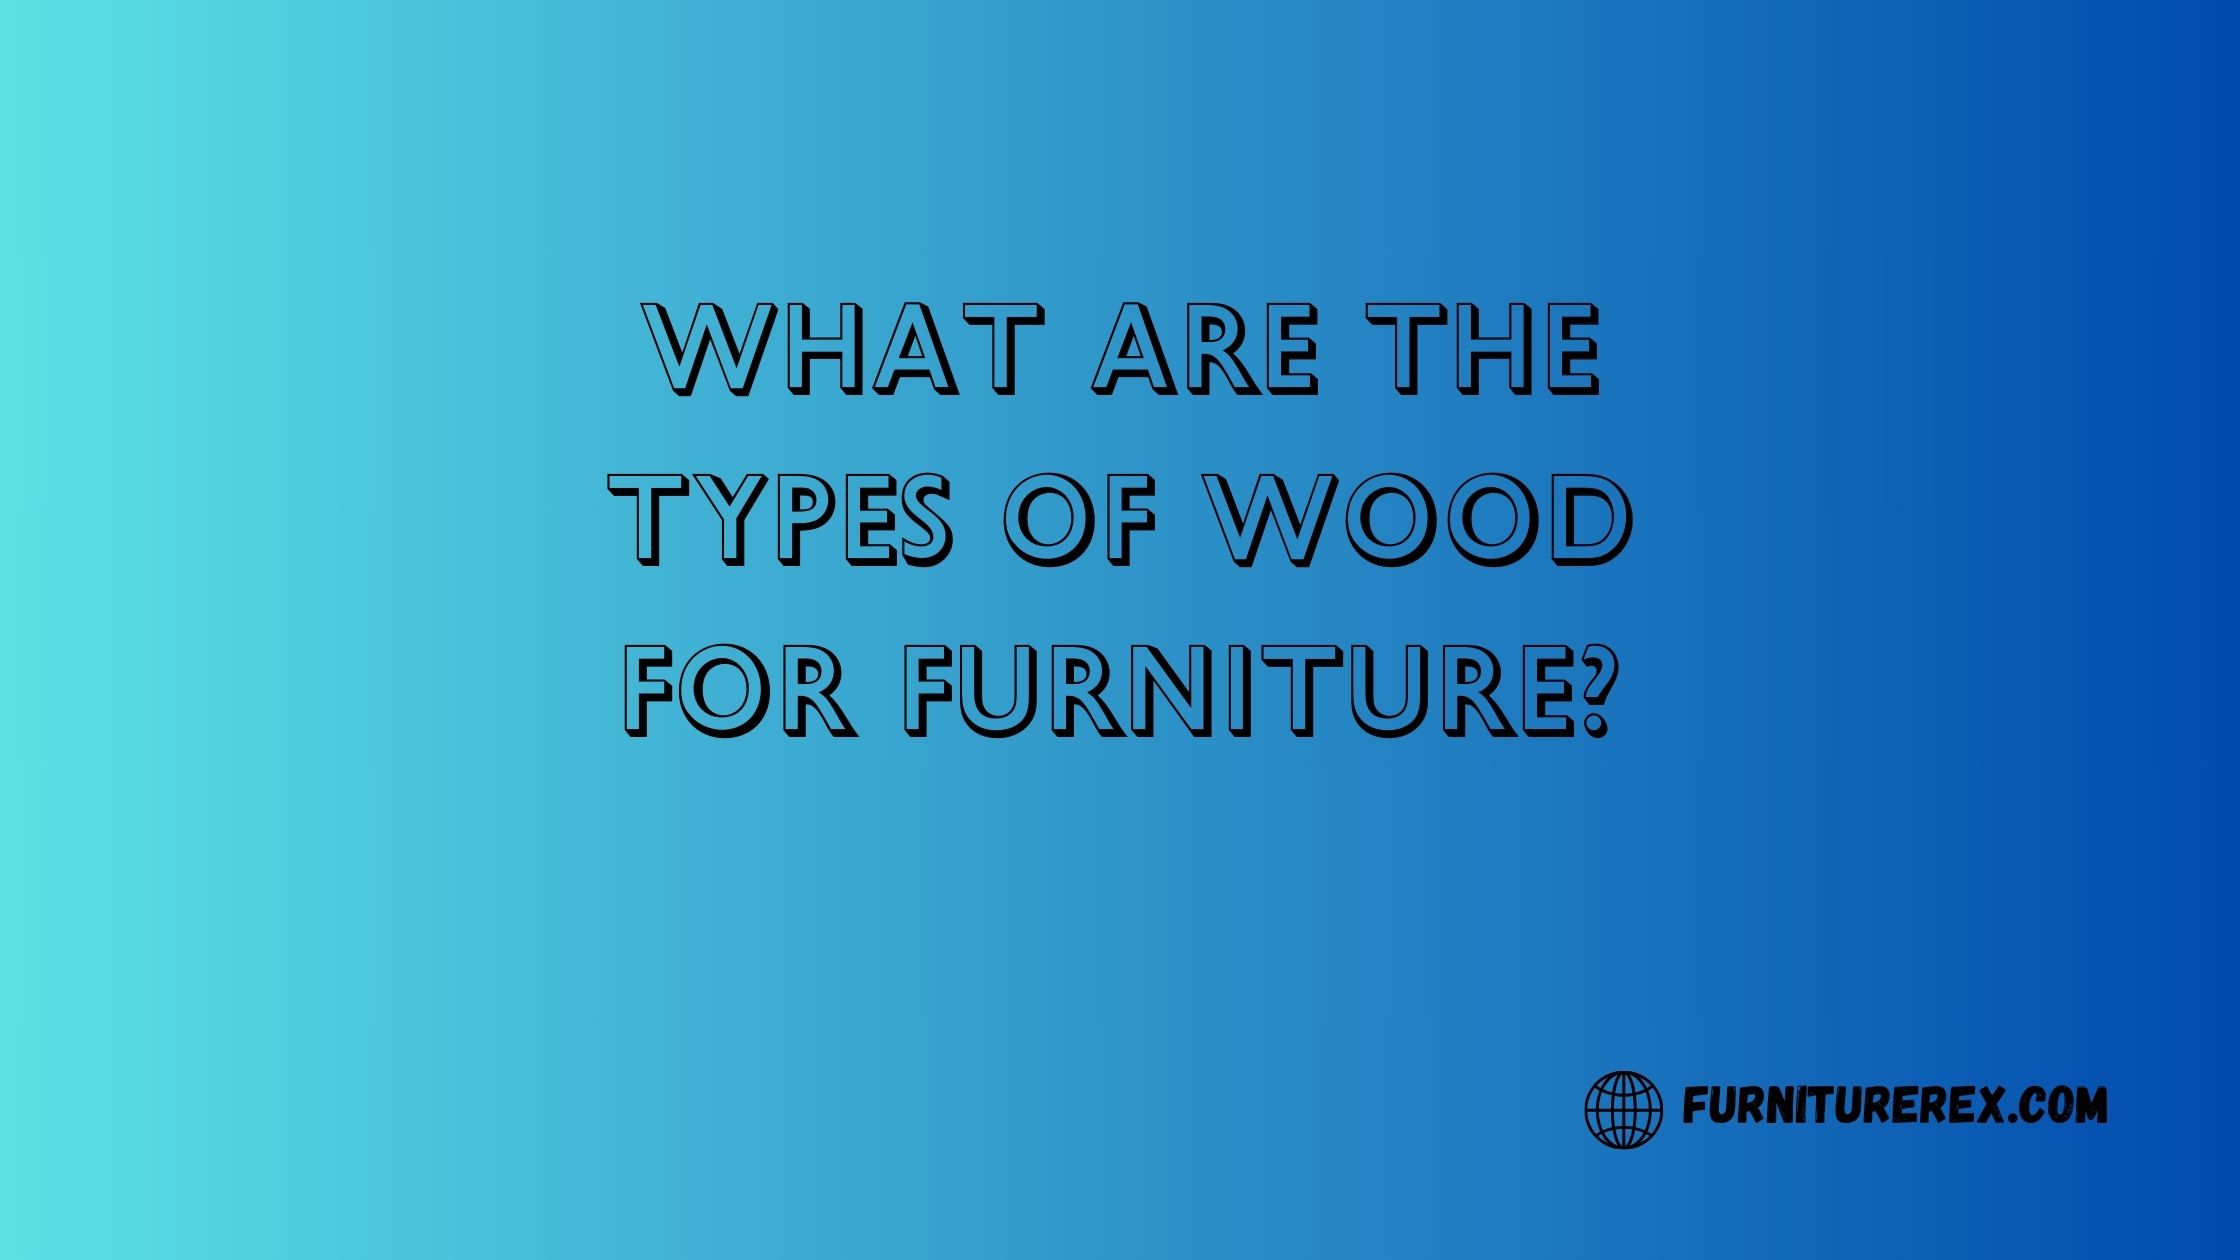 Types of Wood For Furniture